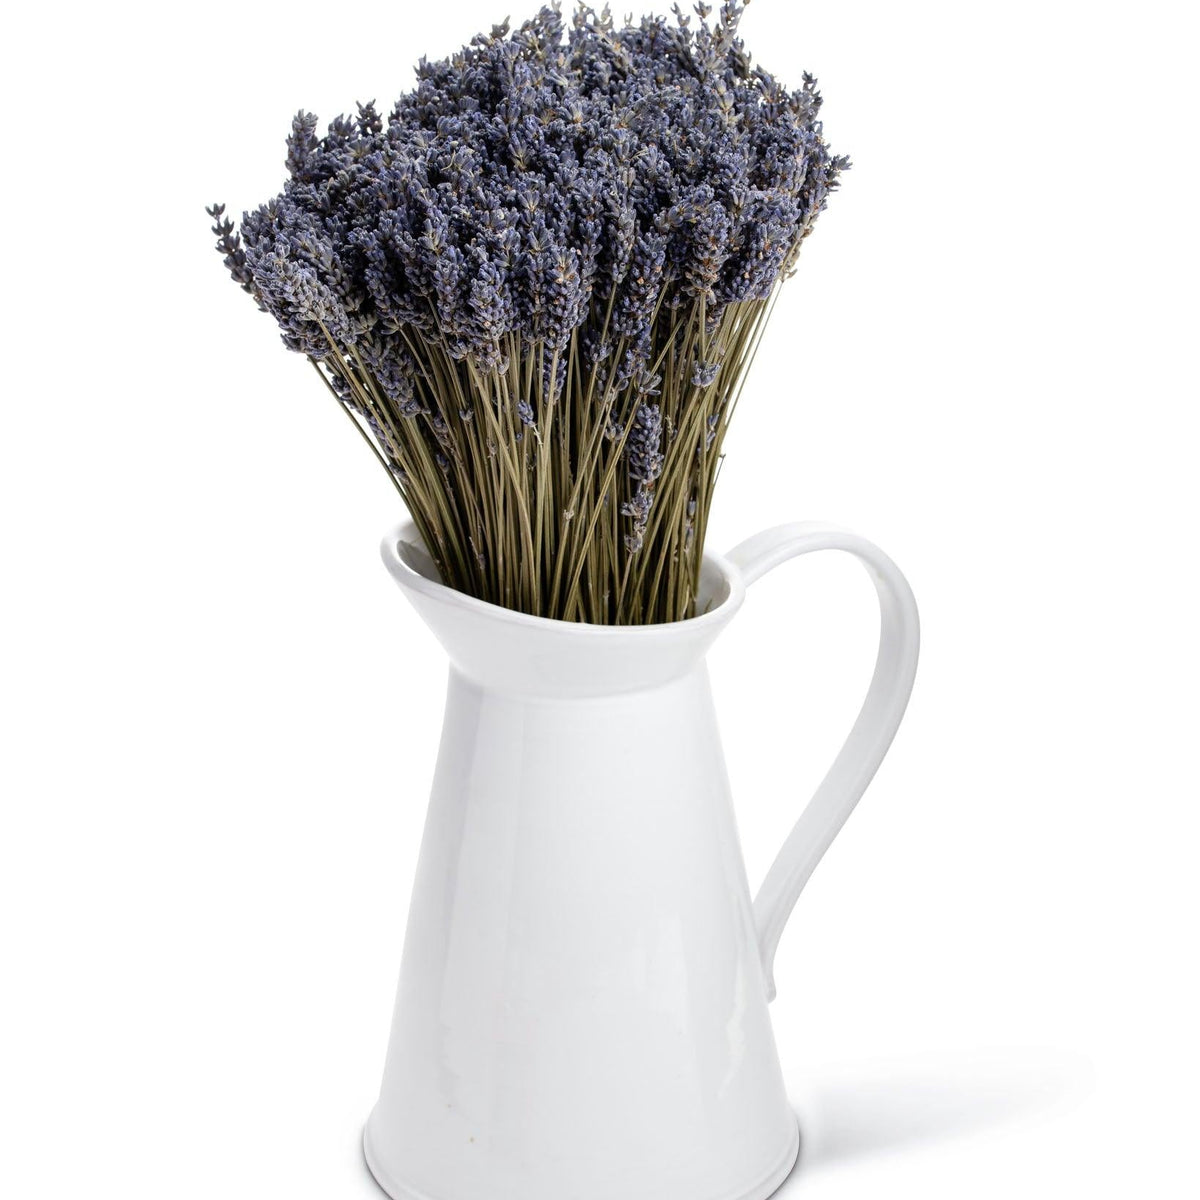 Dried French Lavender Bunches- Set of 2 - New York Lavender by the